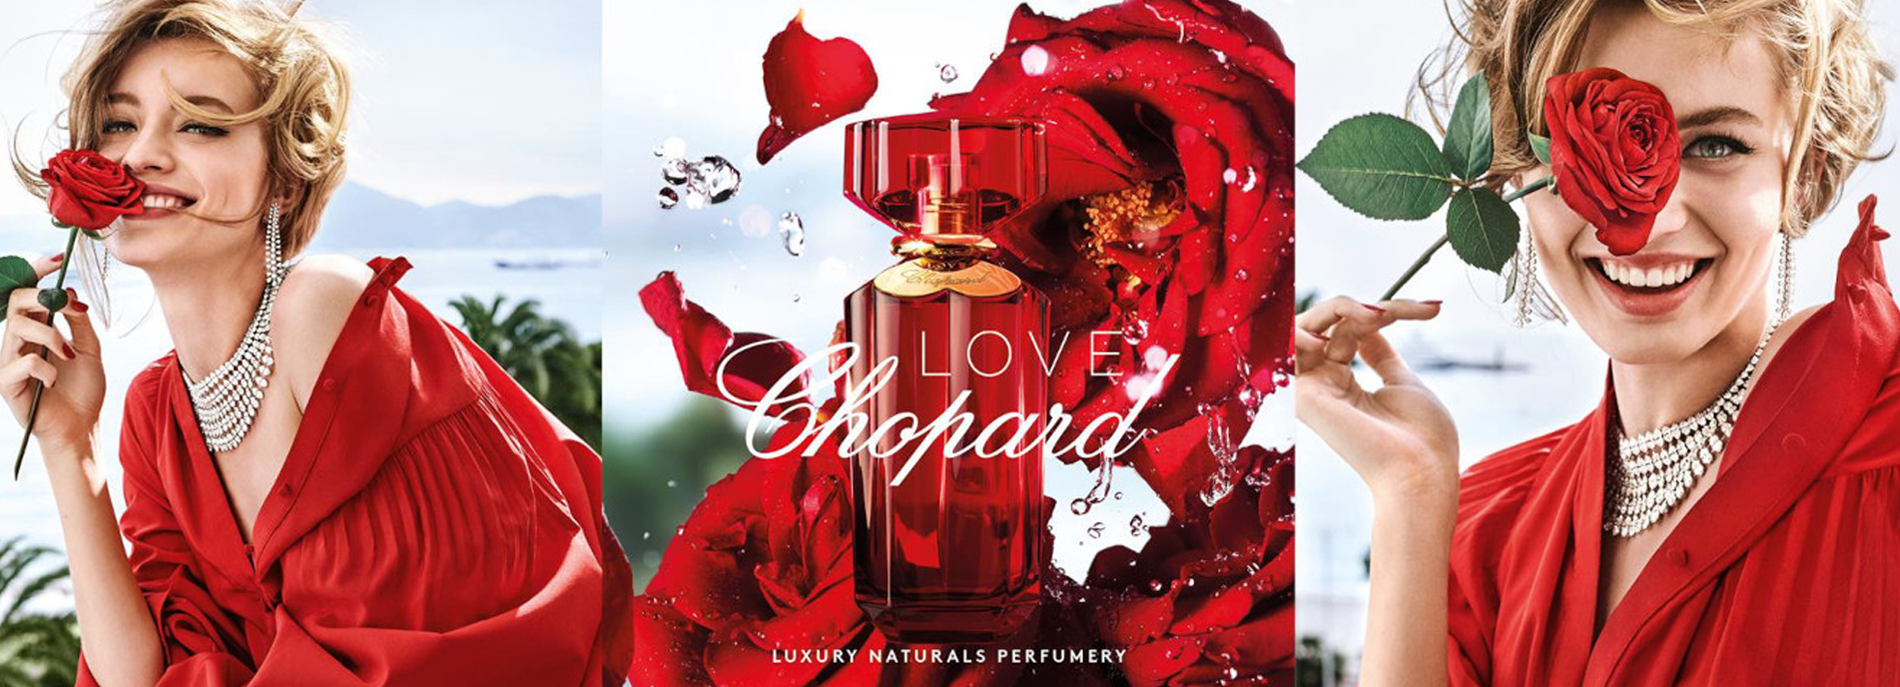 CHOPARD - Exclusive Lines